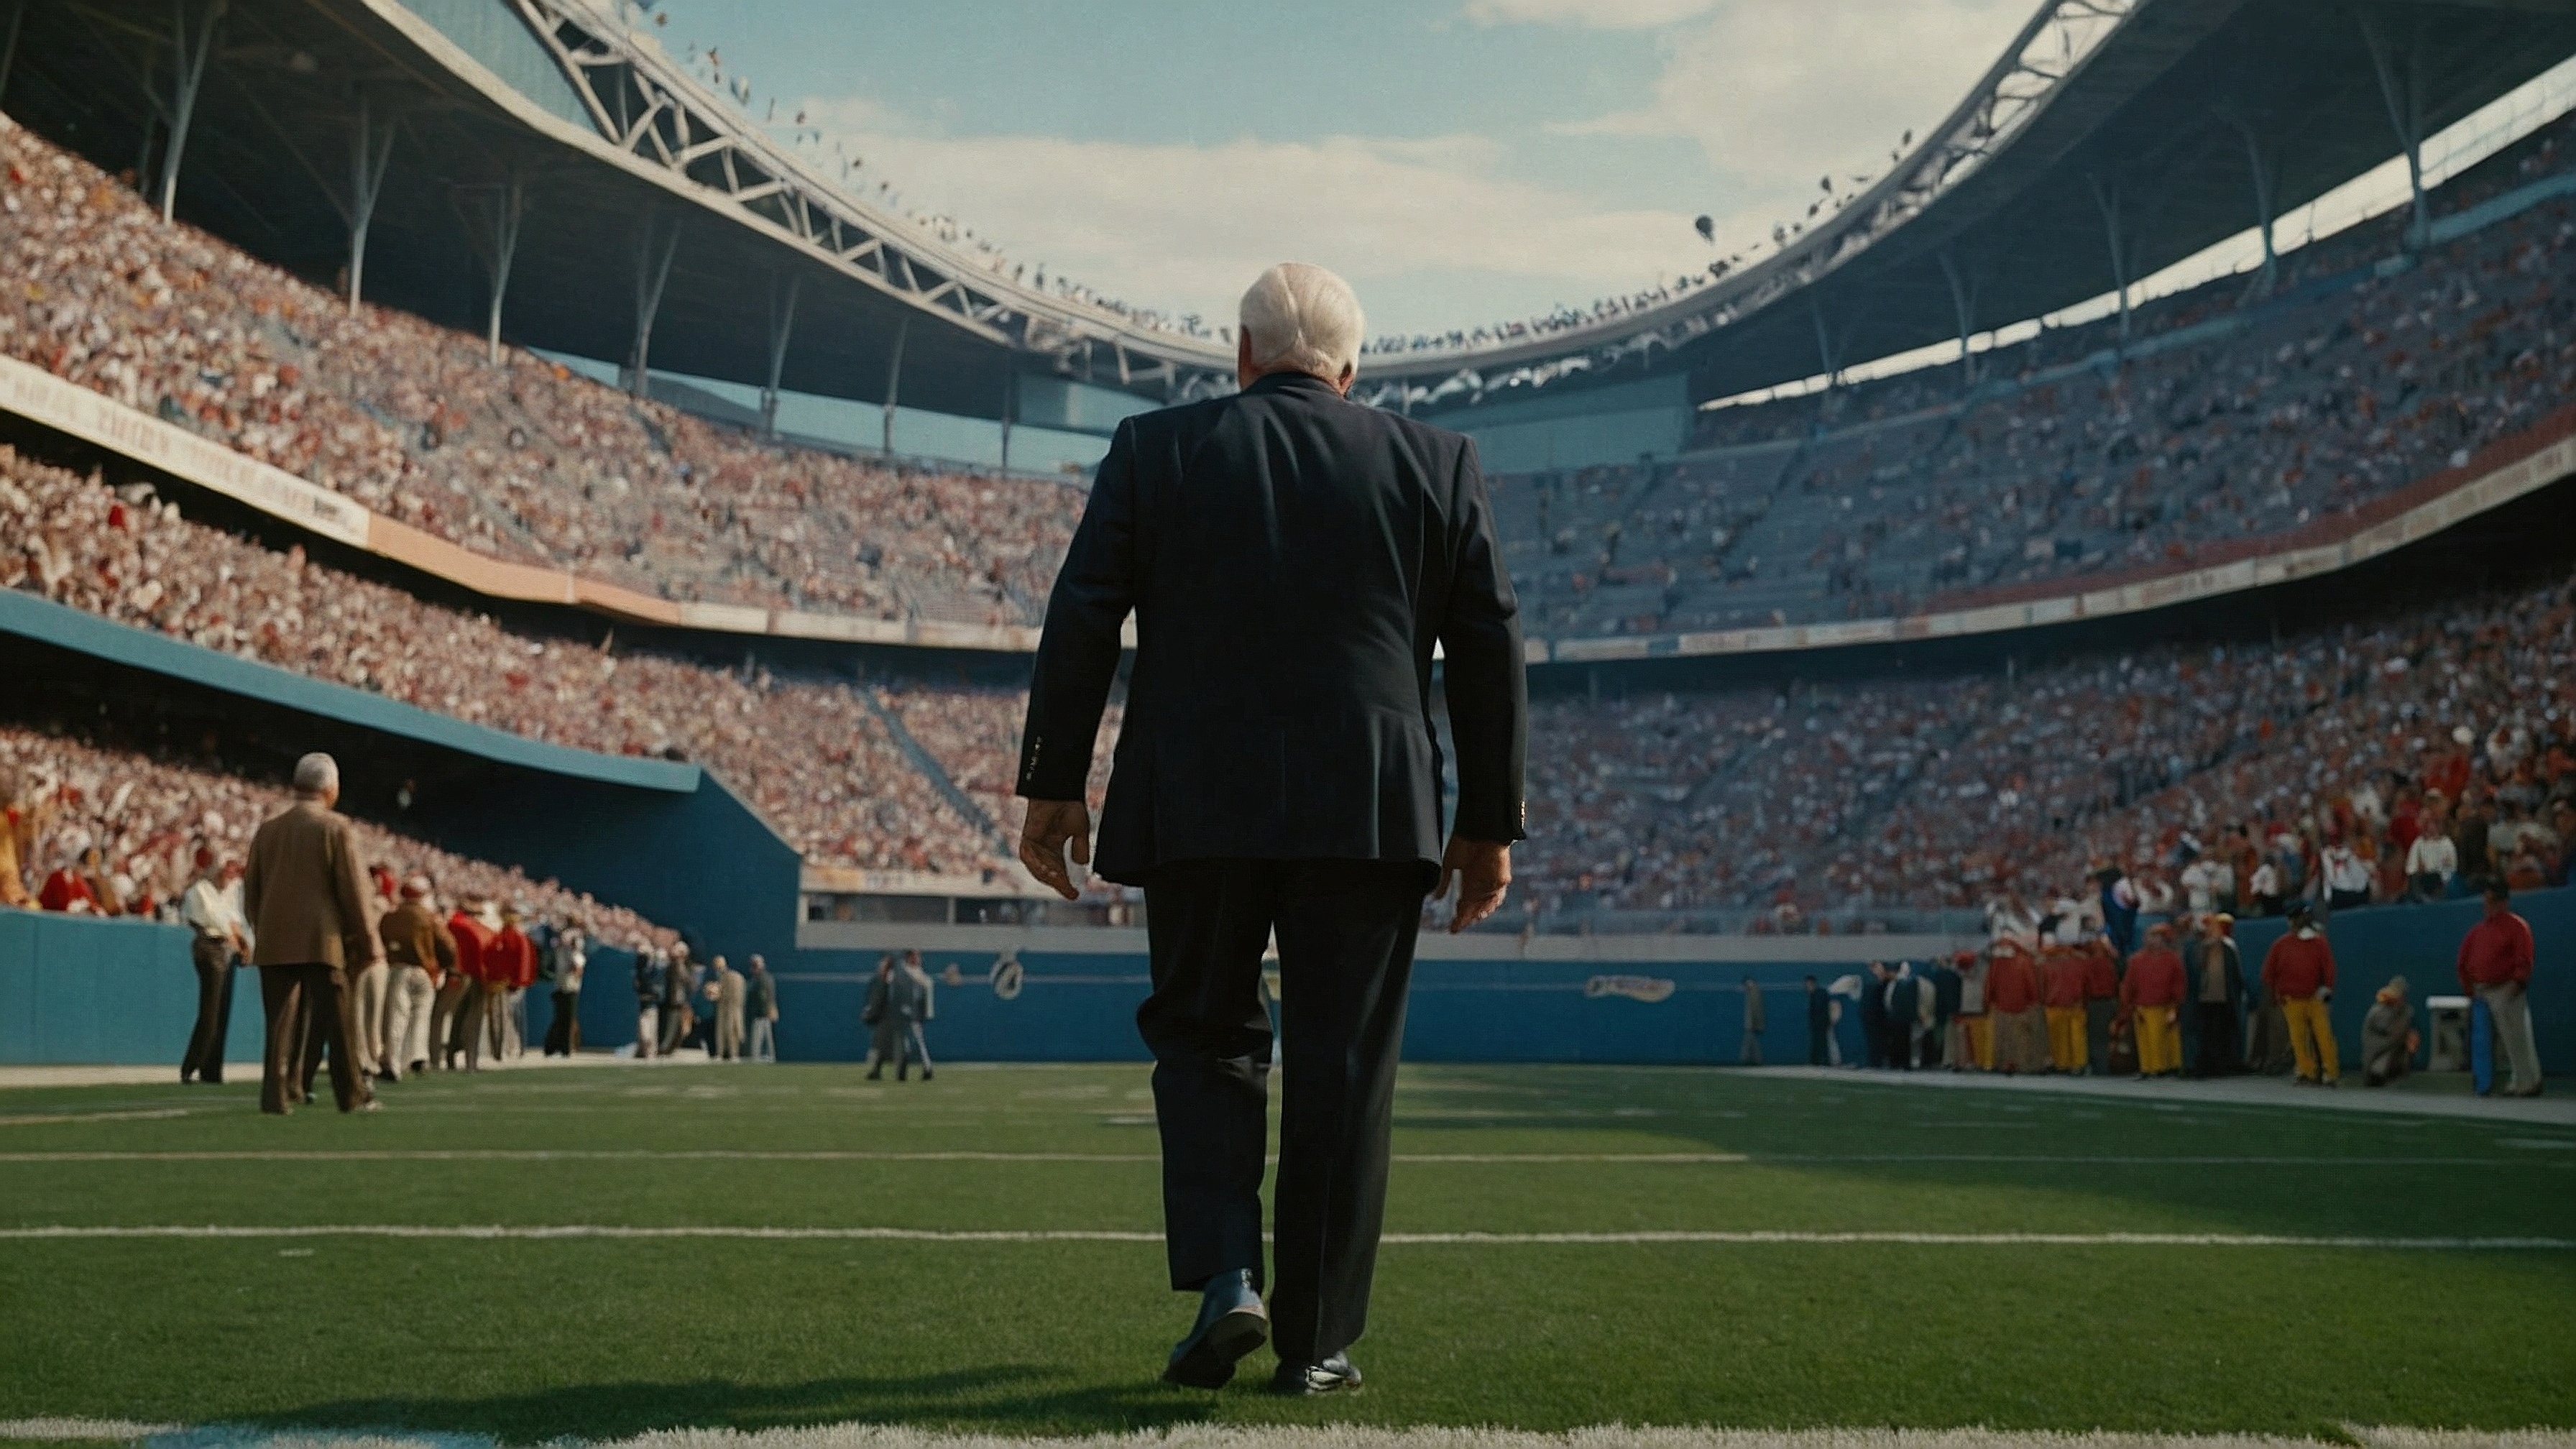 Retro American football coach walking across a football field in front of a sold out stadium. Image generated with LeonardoAI.